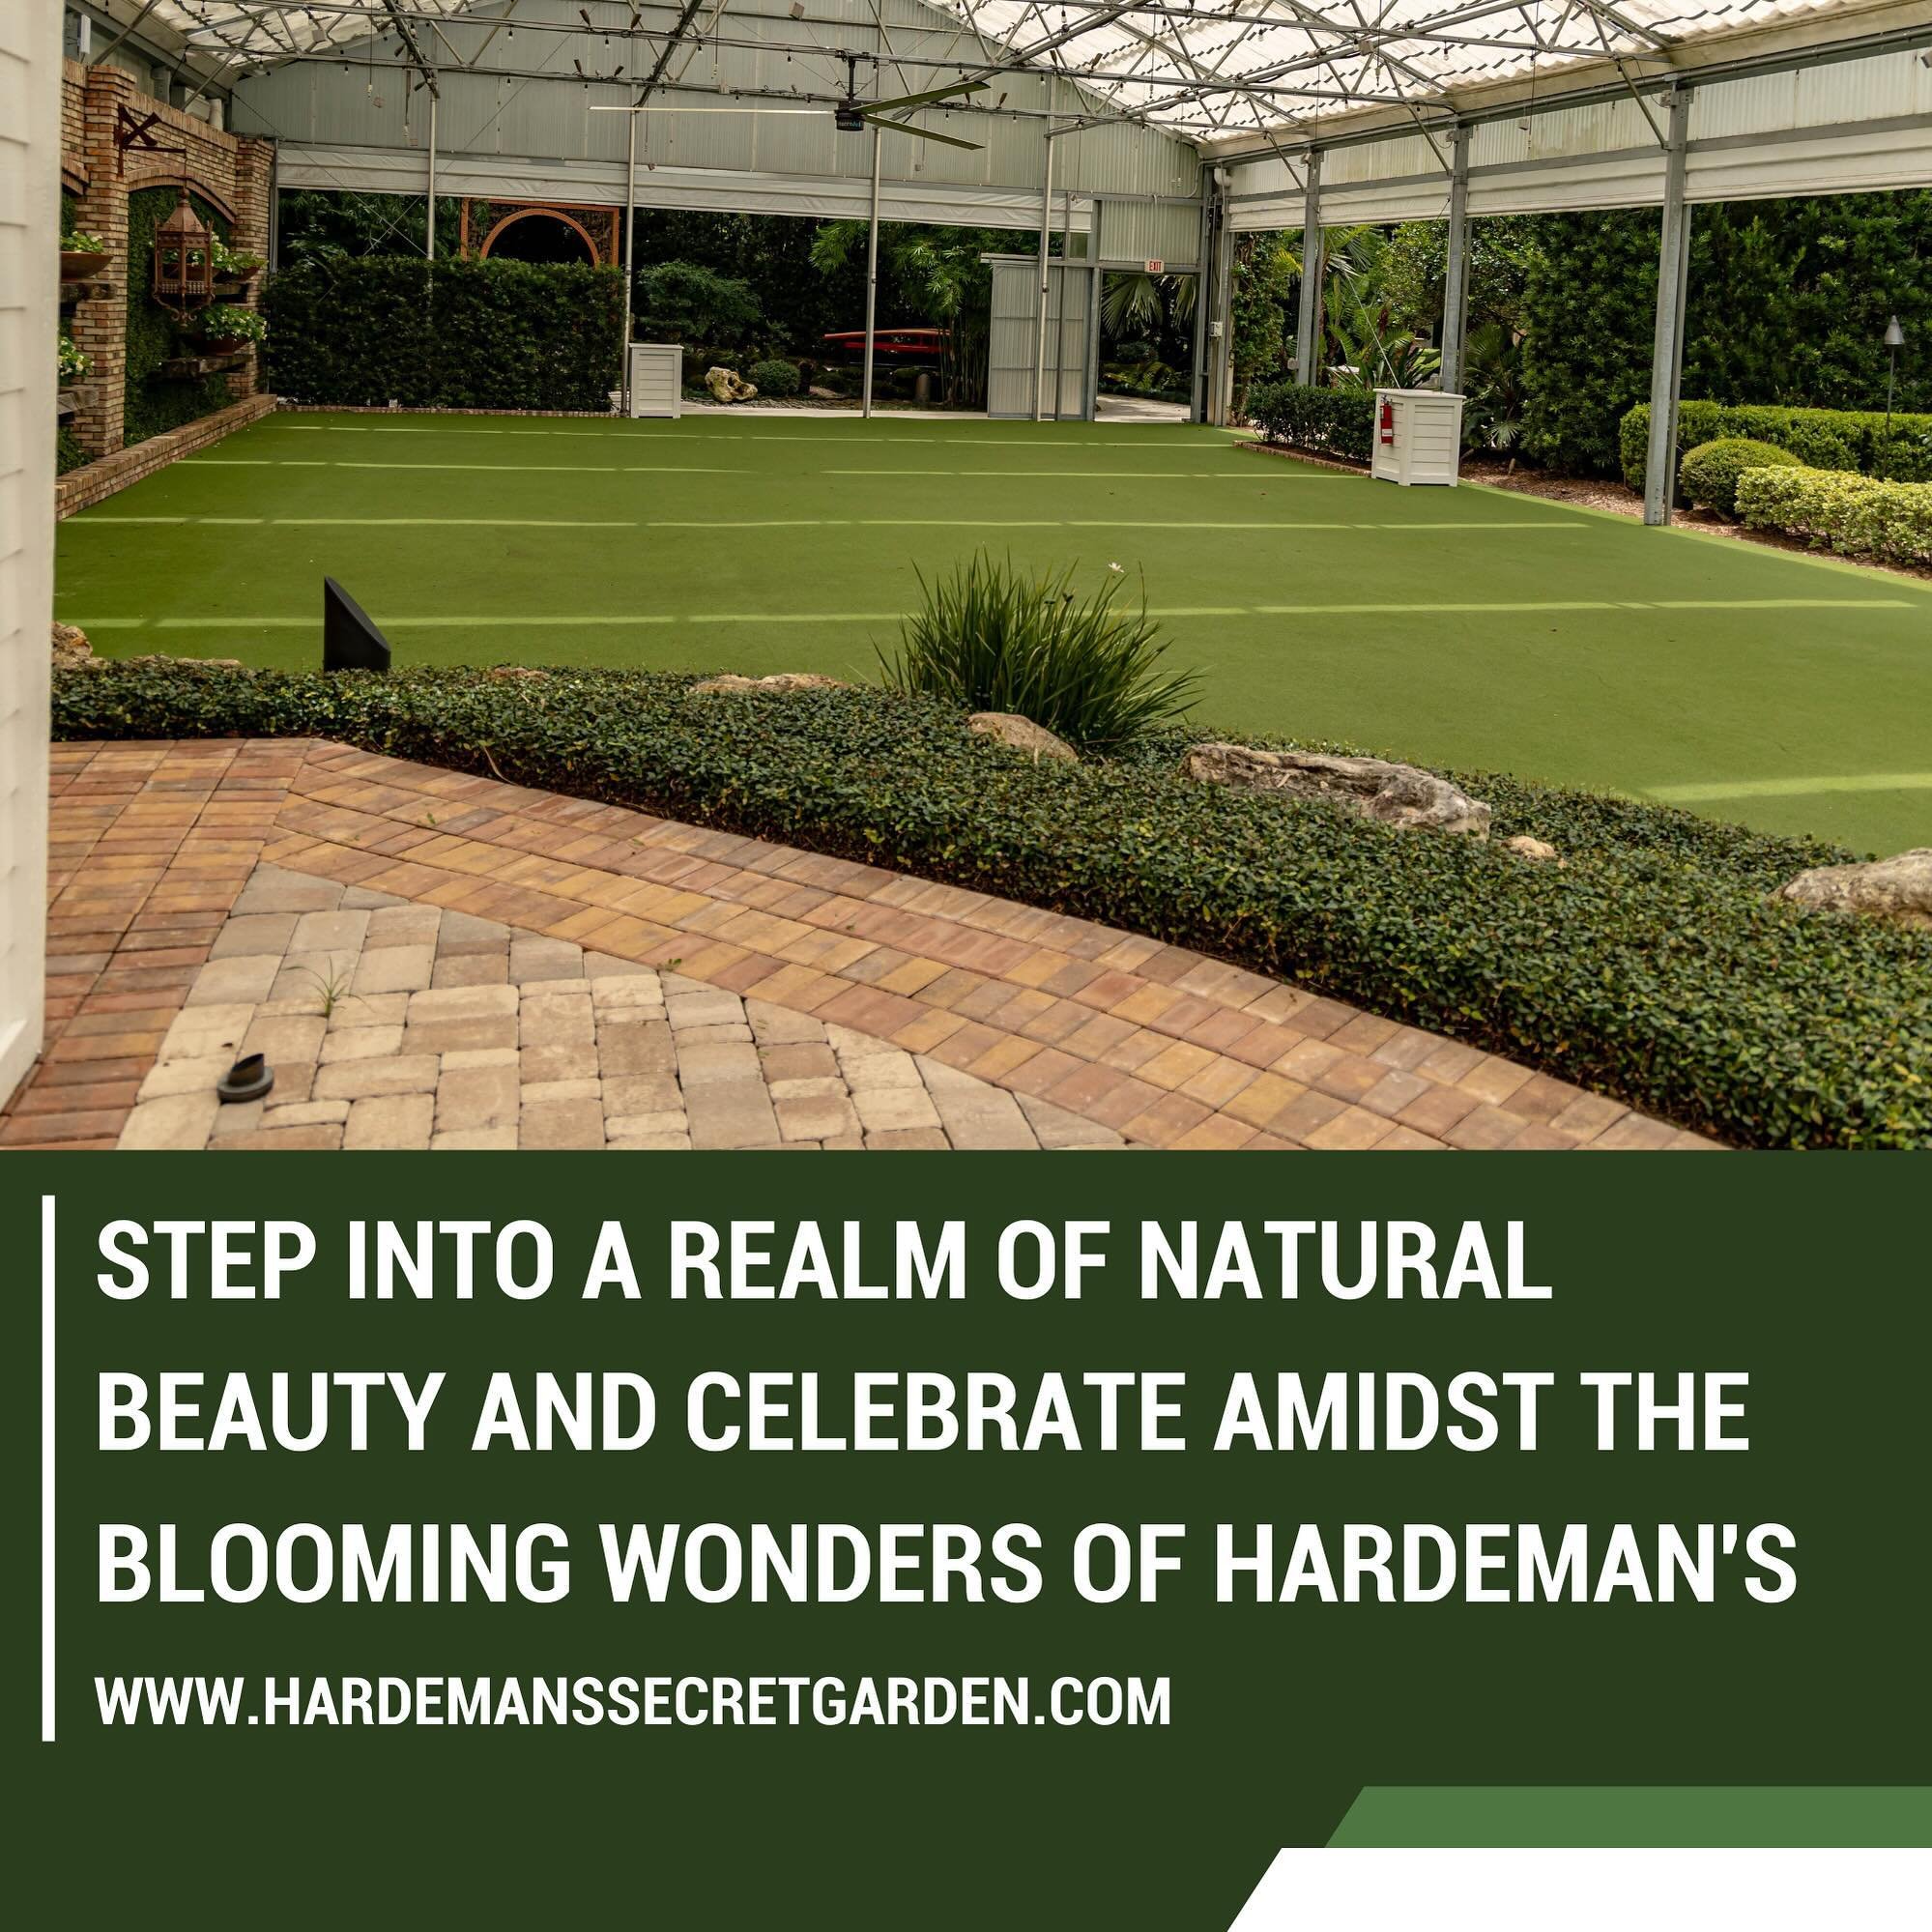 Enter a world of organic splendor and revel in the midst of the blossoming marvels of Hardeman&rsquo;s Secret Garden, where each instant radiates pure enchantment.

https://www.hardemanssecretgarden.com/
#hardemanssecretgarden #weddings #weddingrecep